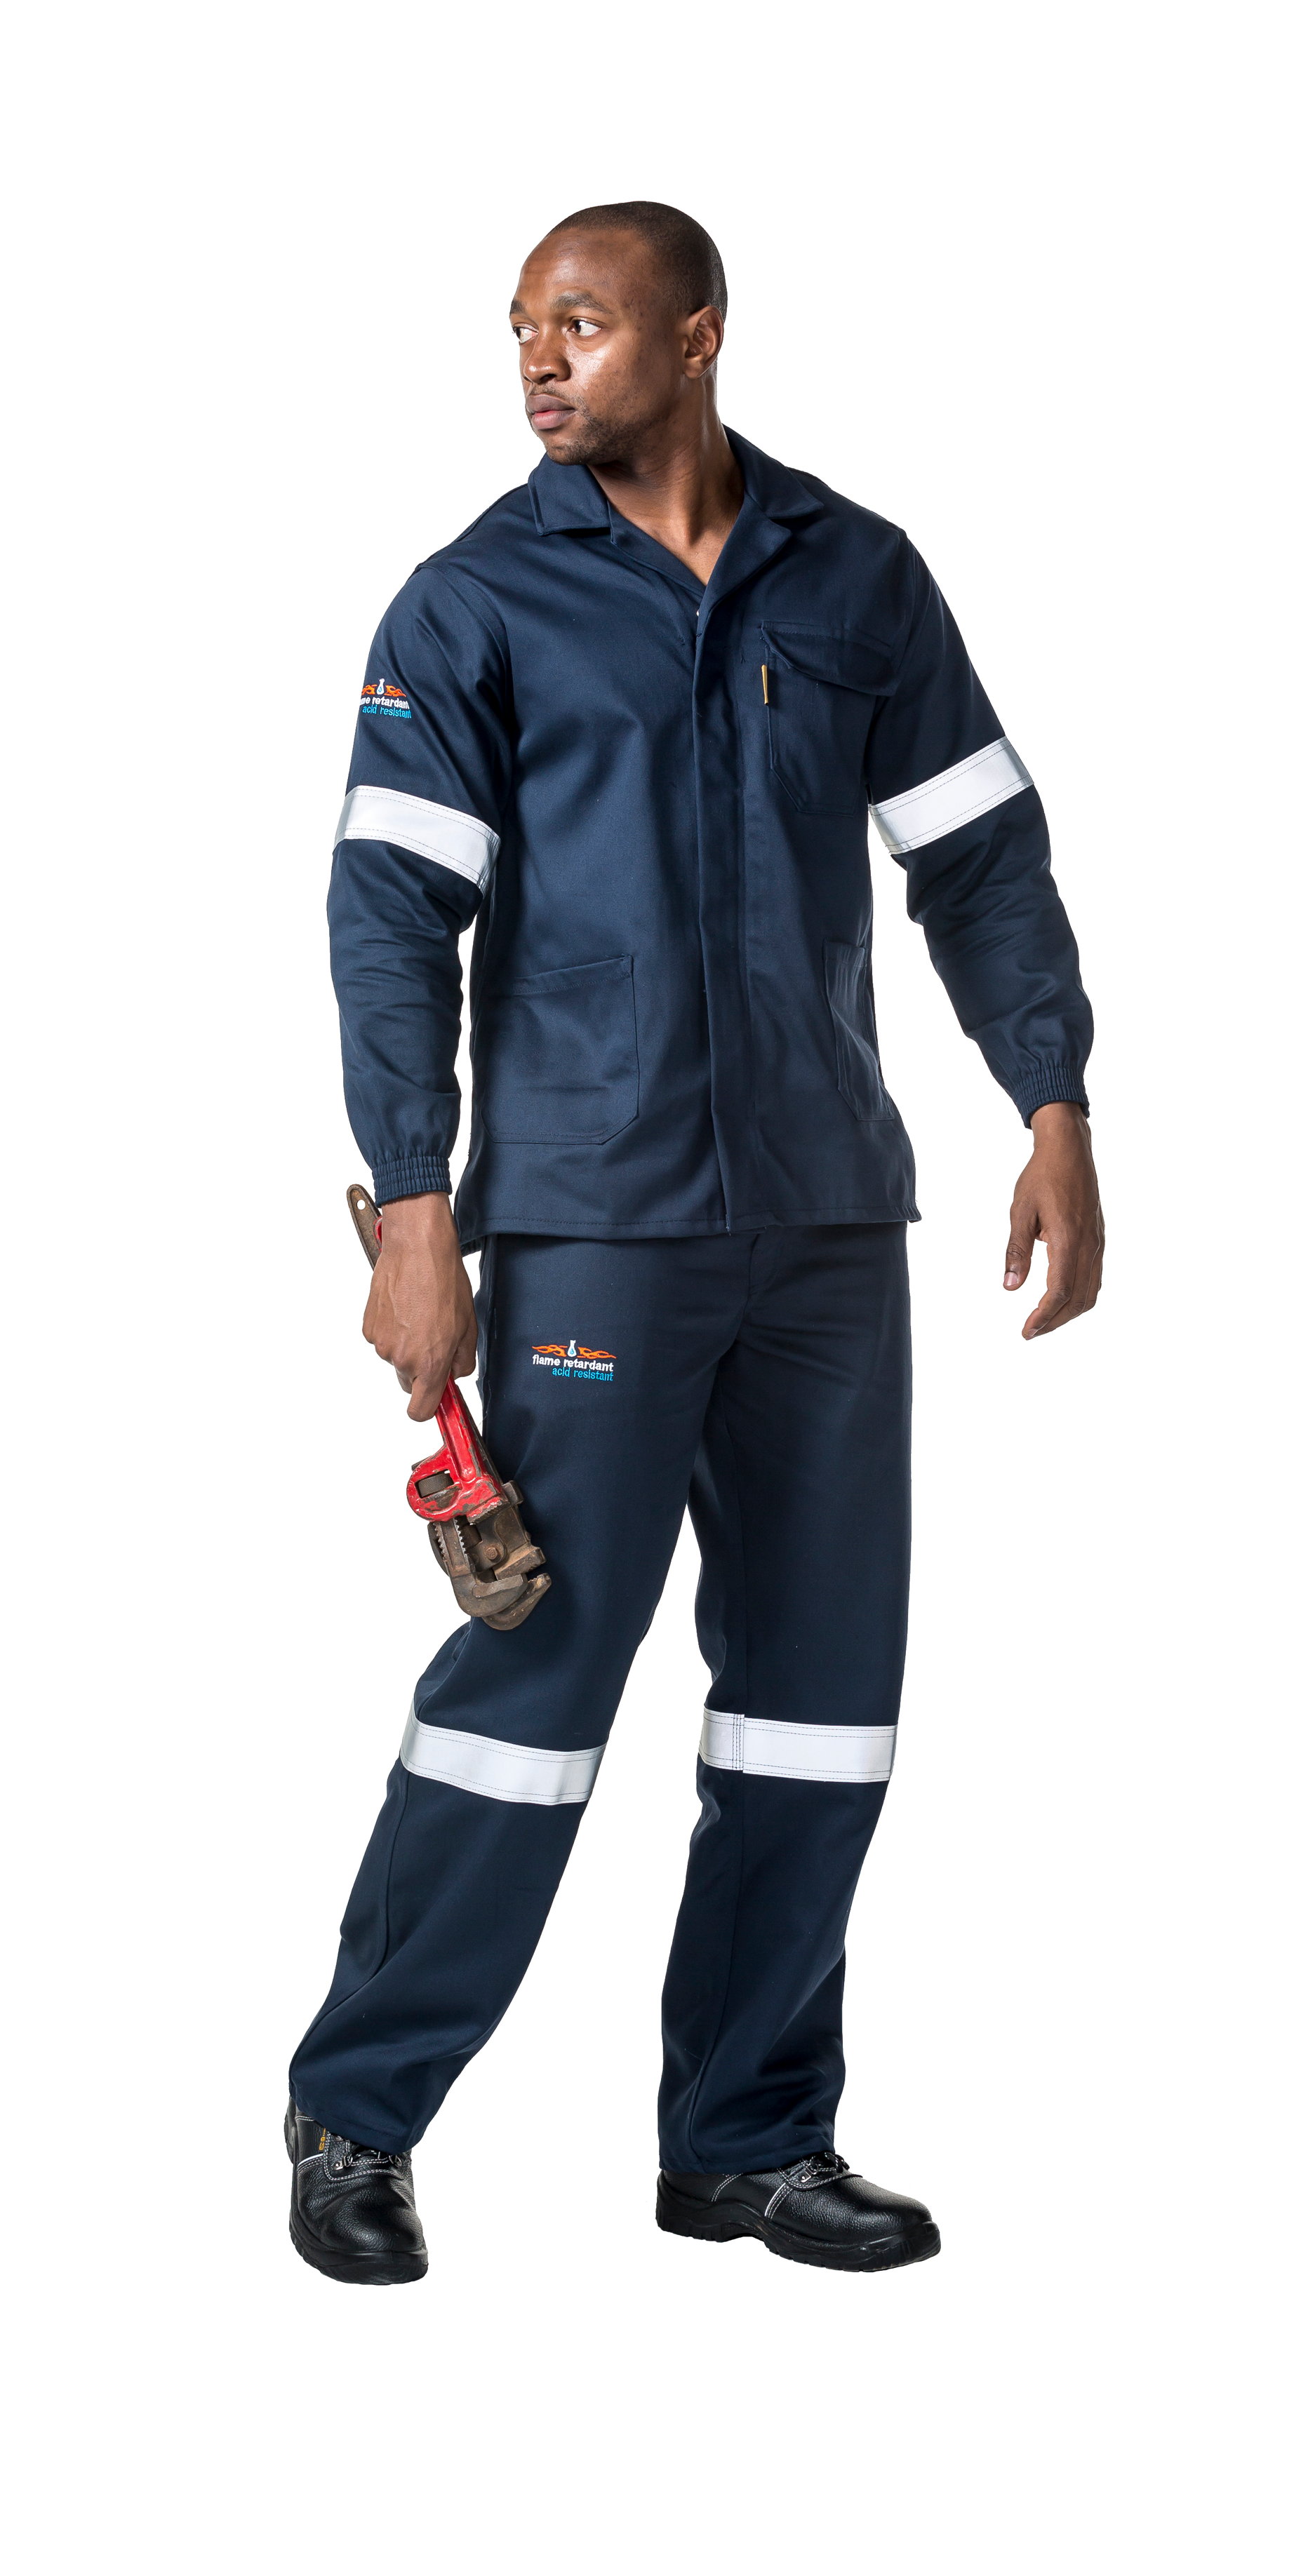 Mascot Workwear 13679 Arosa Multisafe Trousers With Kneepad Pockets   Clothing from MI Supplies Limited UK